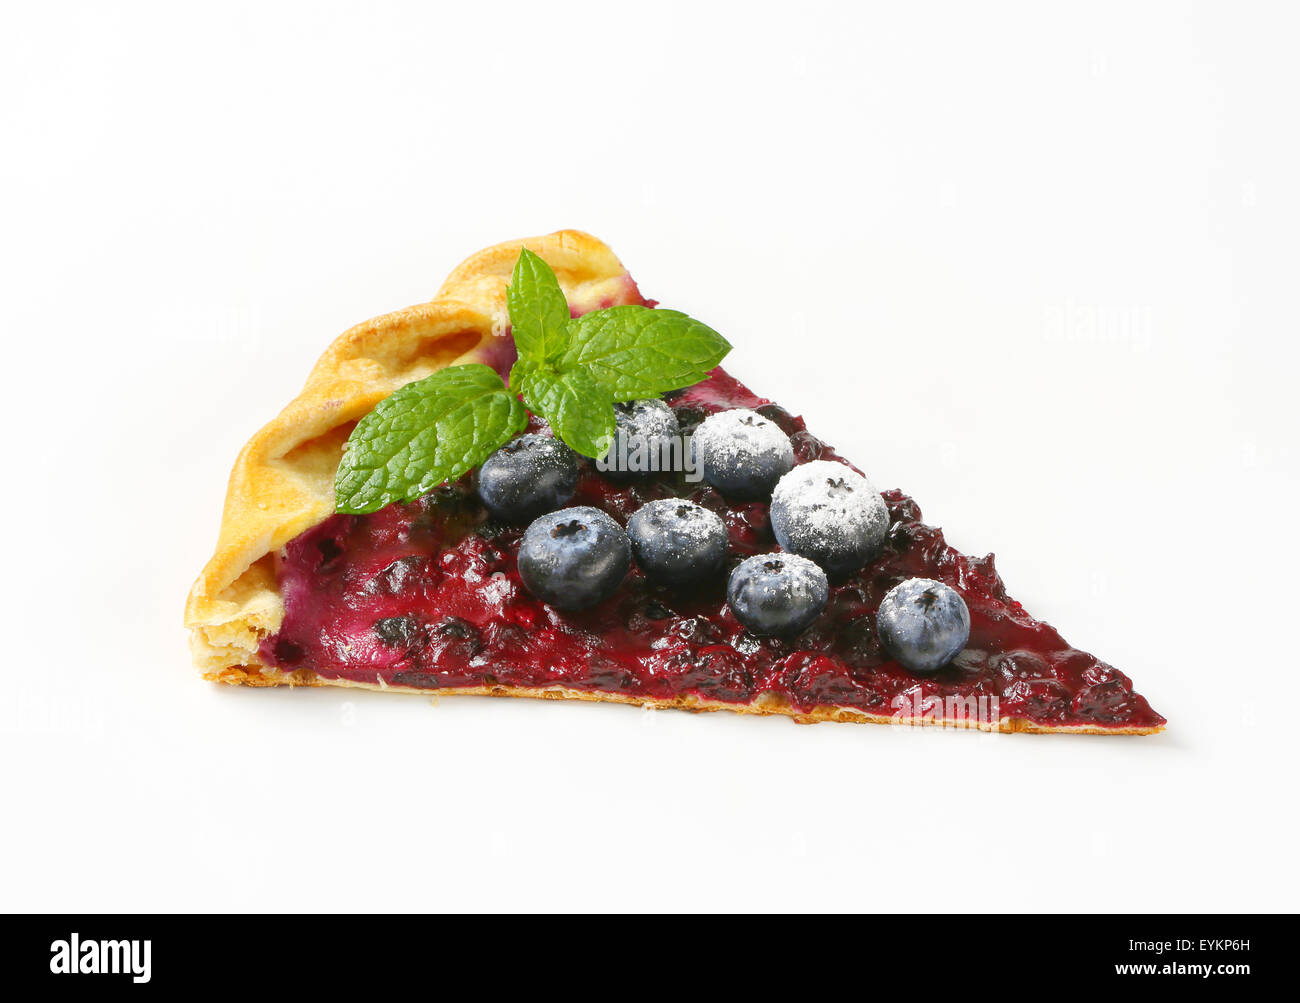 French cuisine - Quark and blueberry flammkuchen Stock Photo